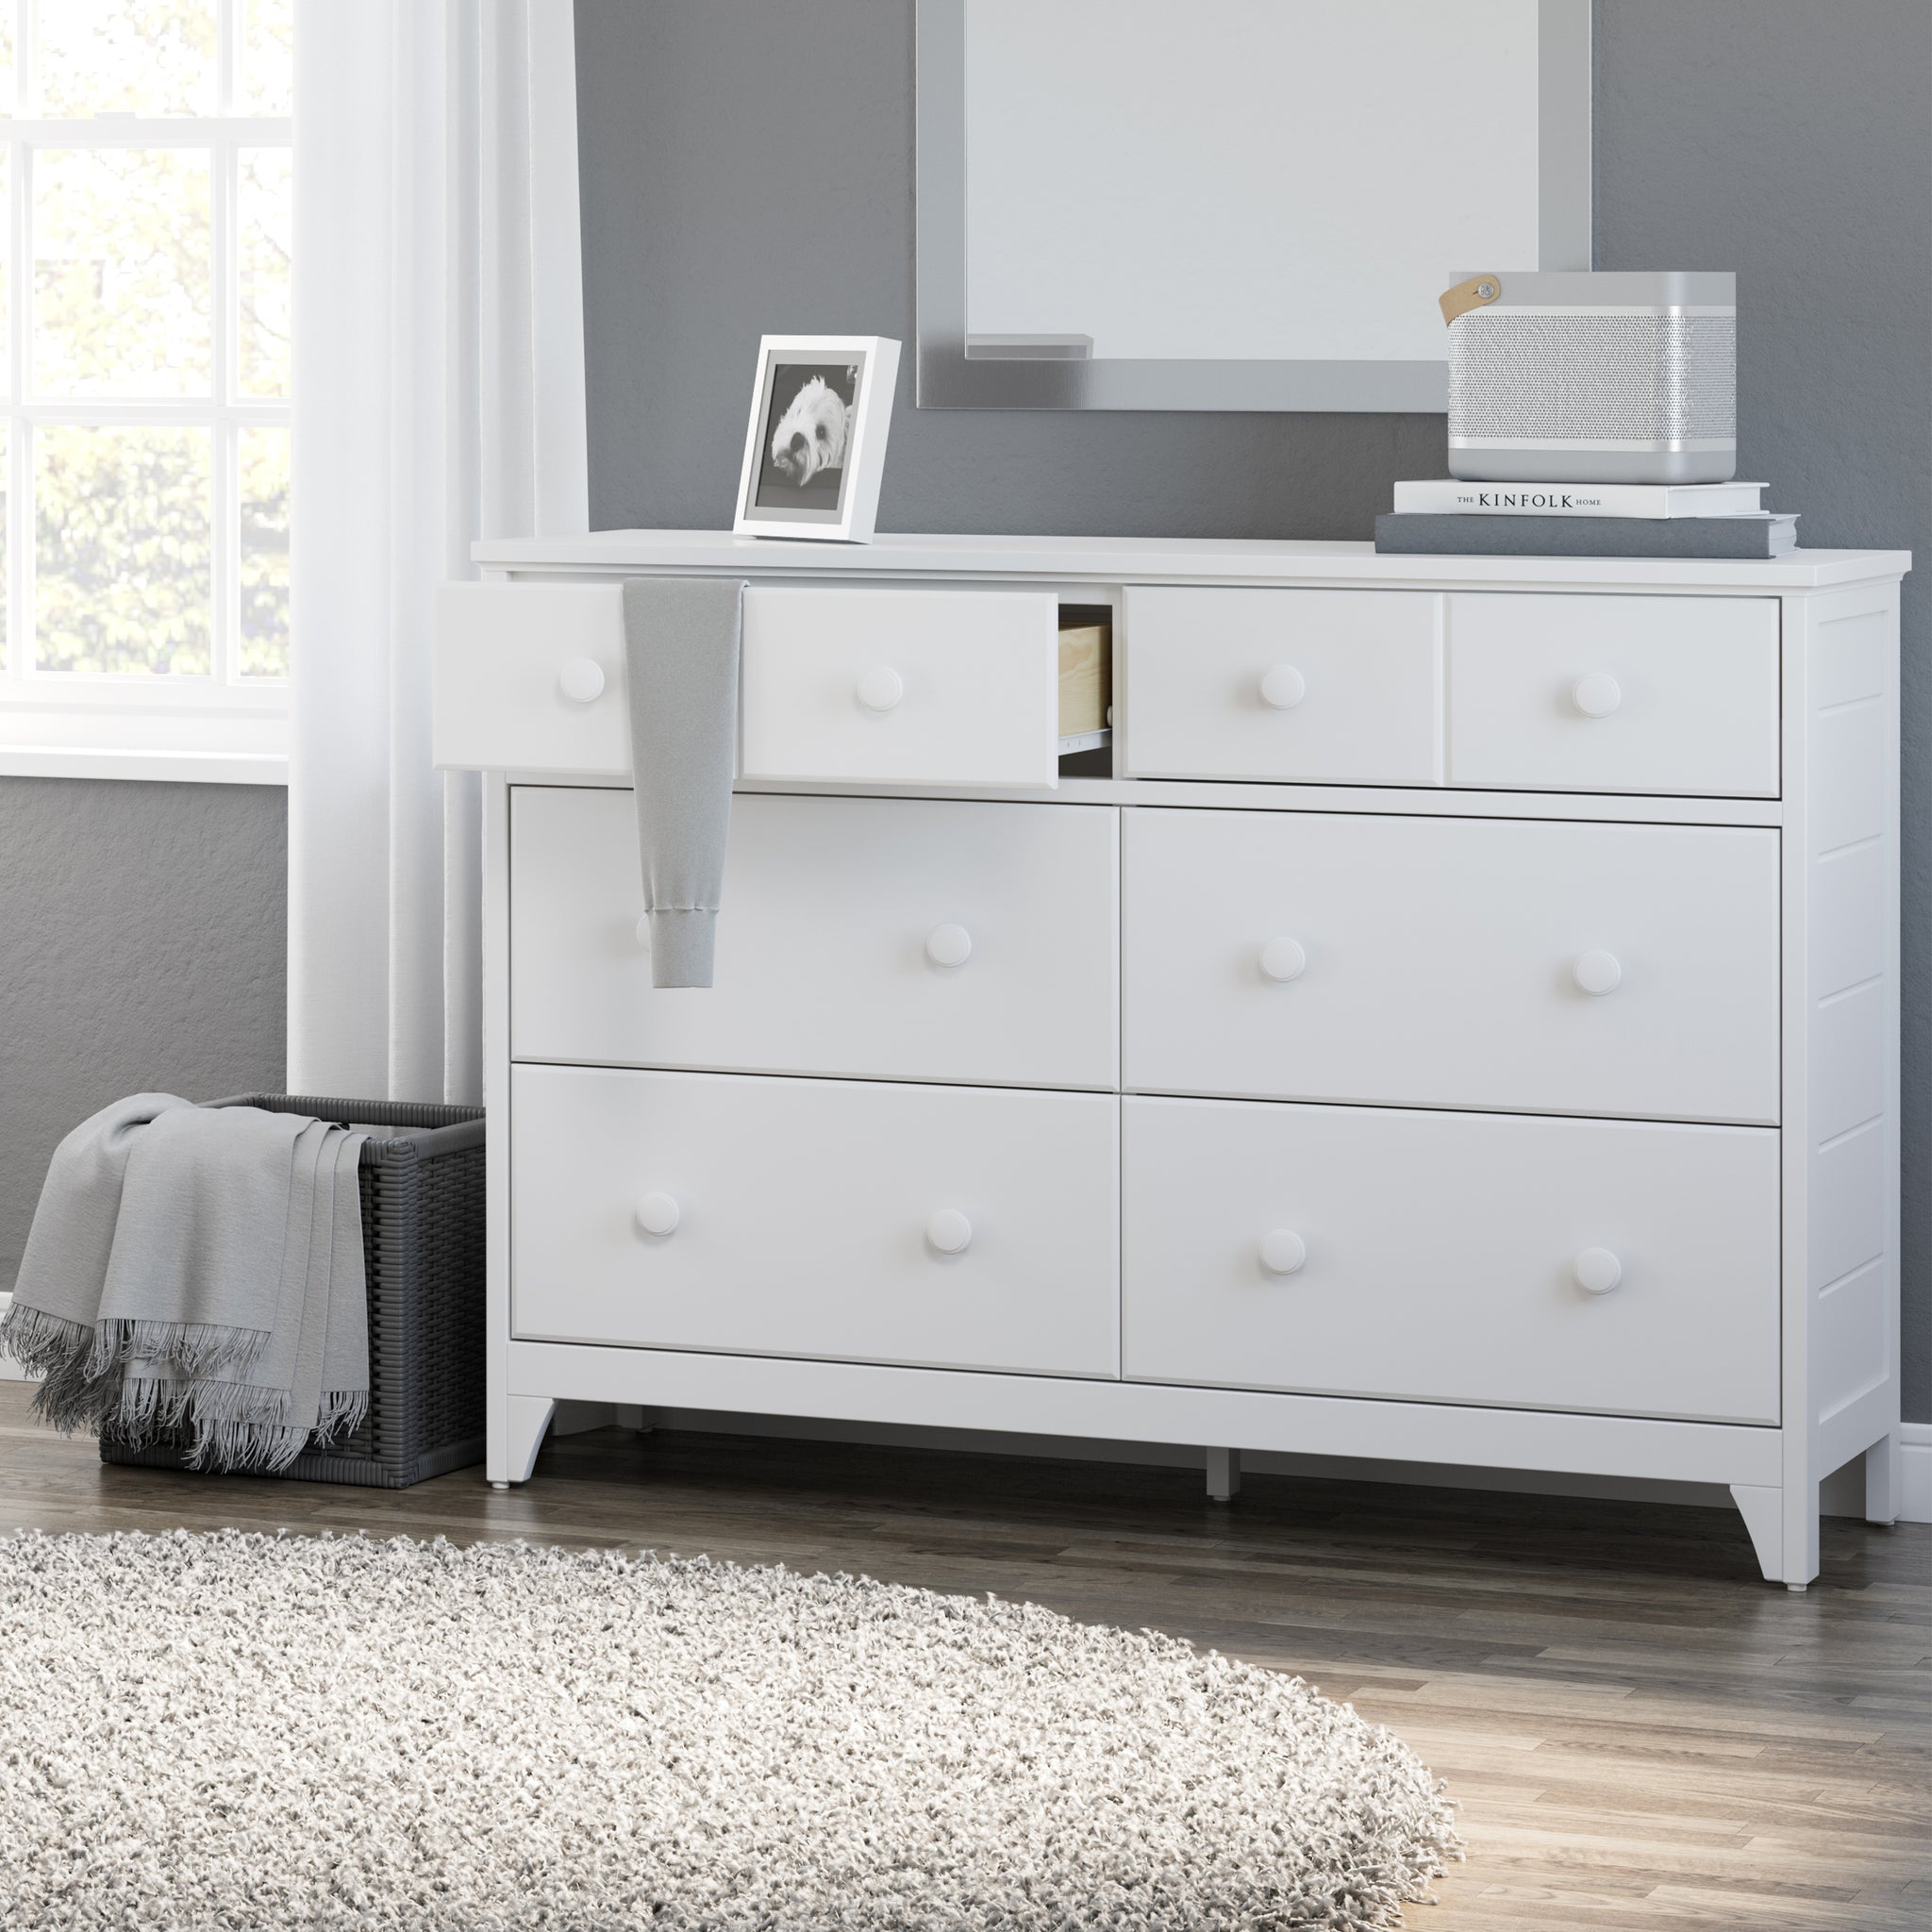 White 6 drawer dresser in nursery with one open drawer